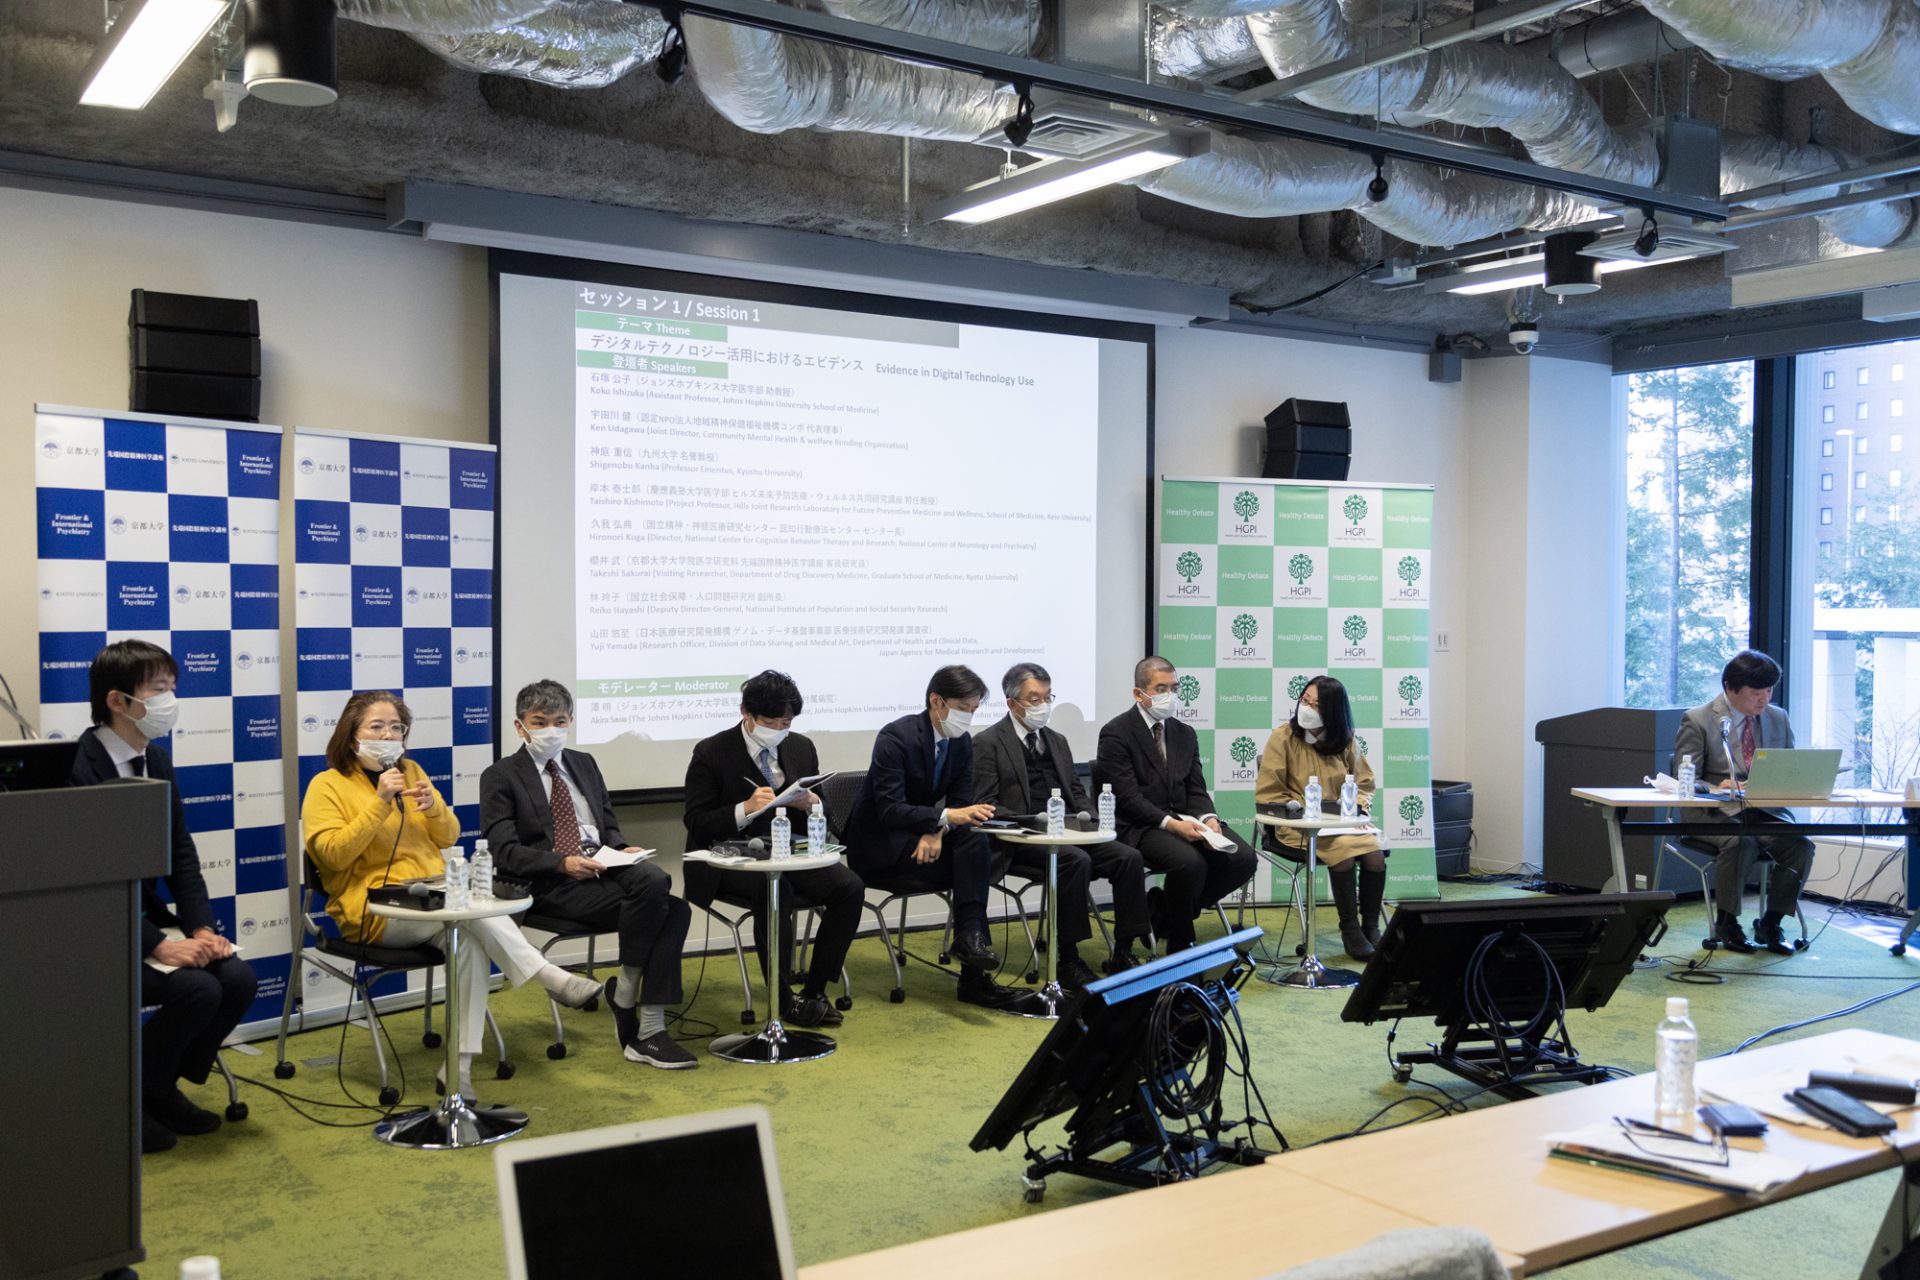 [Event Report] Co-hosted by Health and Global Policy Institute (HGPI) and the Kyoto University Graduate School of Medicine’s Frontier & International Psychiatry Laboratory- The Global Expert Meeting on “Setting a Direction for Promoting Effective Digital Technology Utilization From the Perspectives of Those Most Affected” (December 20, 2022)